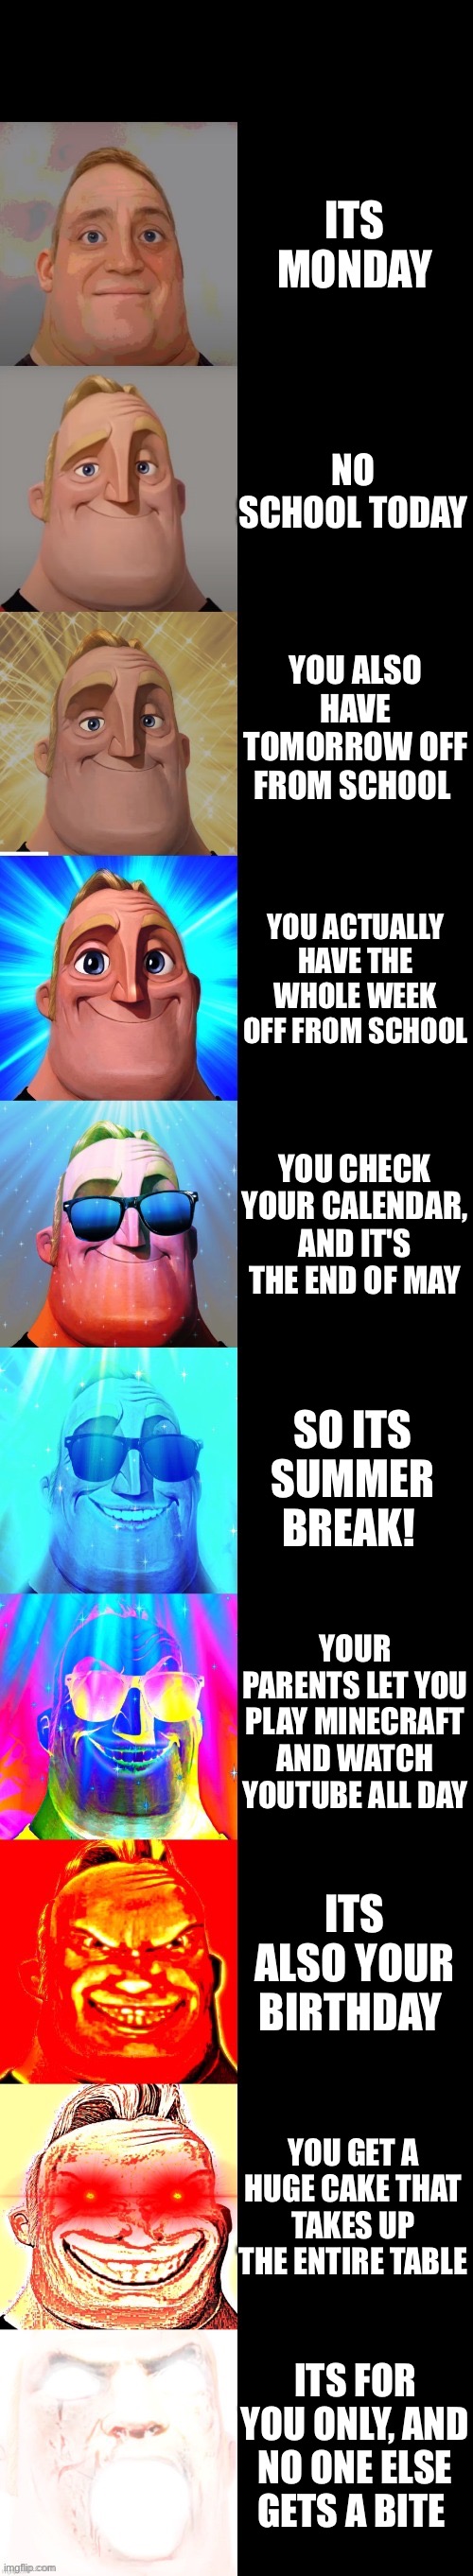 Mr Incredible Becomes Canny | ITS MONDAY; NO SCHOOL TODAY; YOU ALSO HAVE TOMORROW OFF FROM SCHOOL; YOU ACTUALLY HAVE THE WHOLE WEEK OFF FROM SCHOOL; YOU CHECK YOUR CALENDAR, AND IT'S THE END OF MAY; SO ITS SUMMER BREAK! YOUR PARENTS LET YOU PLAY MINECRAFT AND WATCH YOUTUBE ALL DAY; ITS ALSO YOUR BIRTHDAY; YOU GET A HUGE CAKE THAT TAKES UP THE ENTIRE TABLE; ITS FOR YOU ONLY, AND NO ONE ELSE GETS A BITE | image tagged in mr incredible becoming canny | made w/ Imgflip meme maker